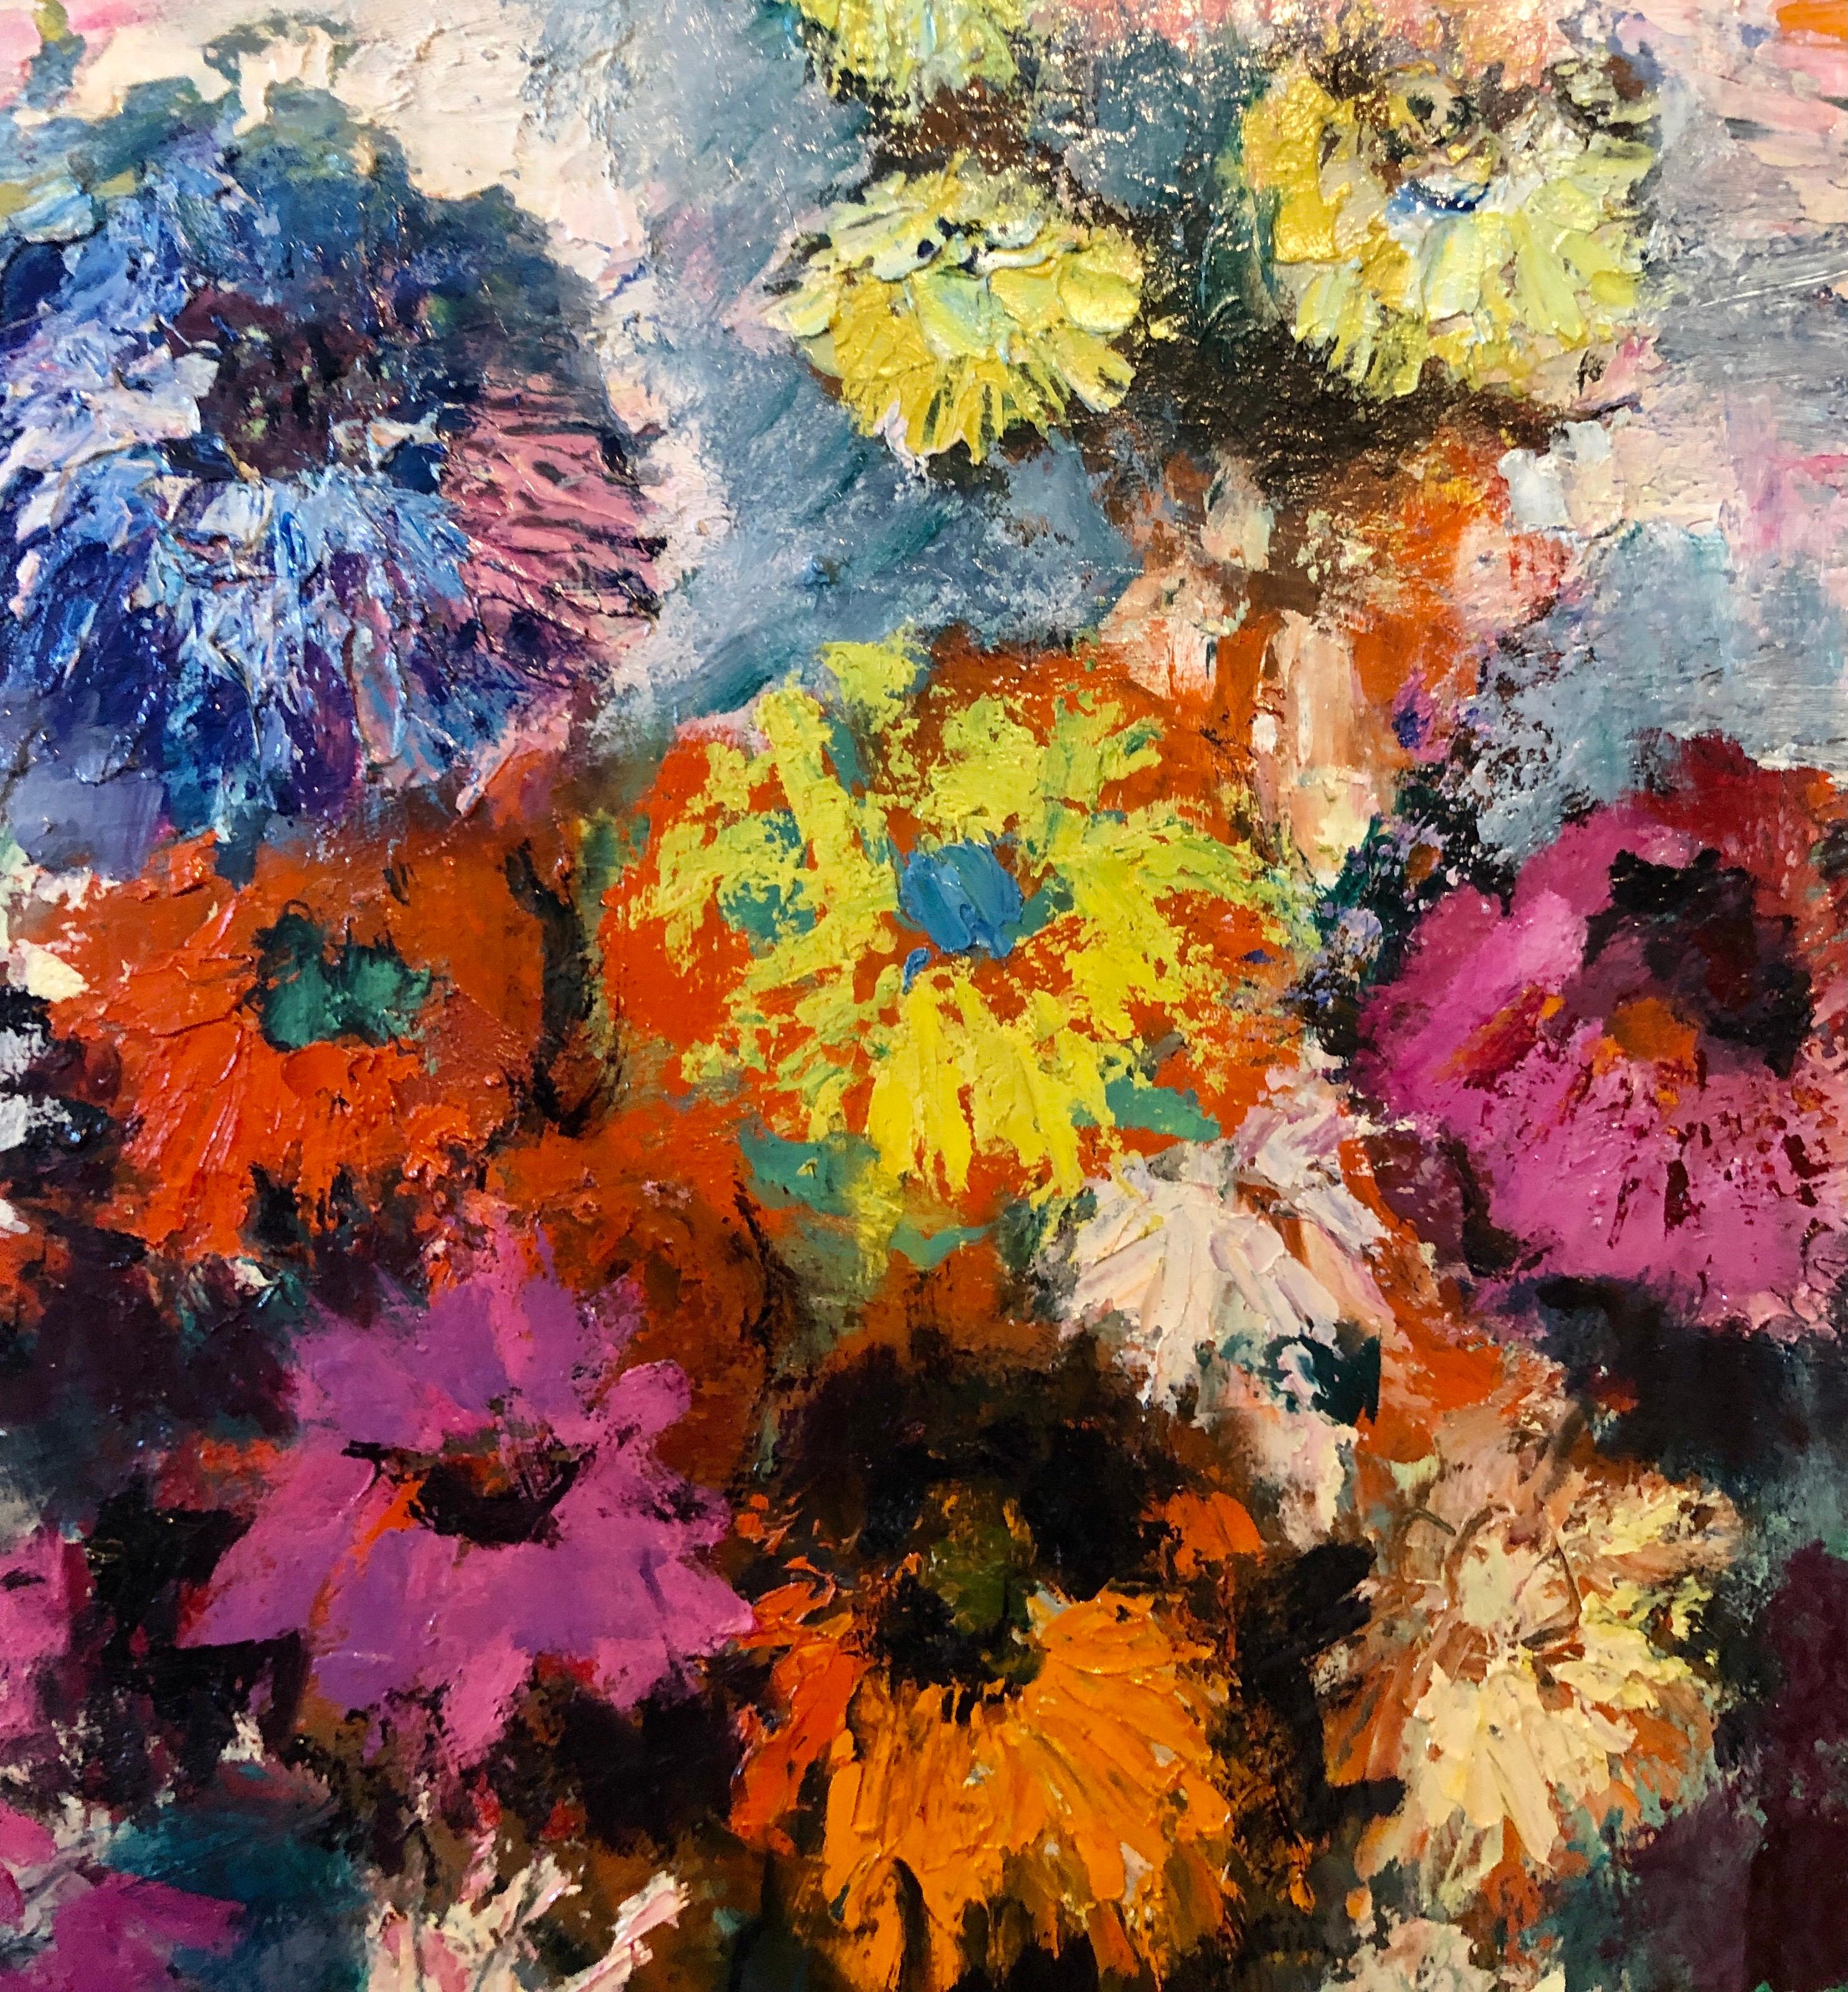 Mid Century Jewish Expressionist Oil Painting Floral Vibrant Colorful Flowers - Beige Interior Painting by Belle Golinko